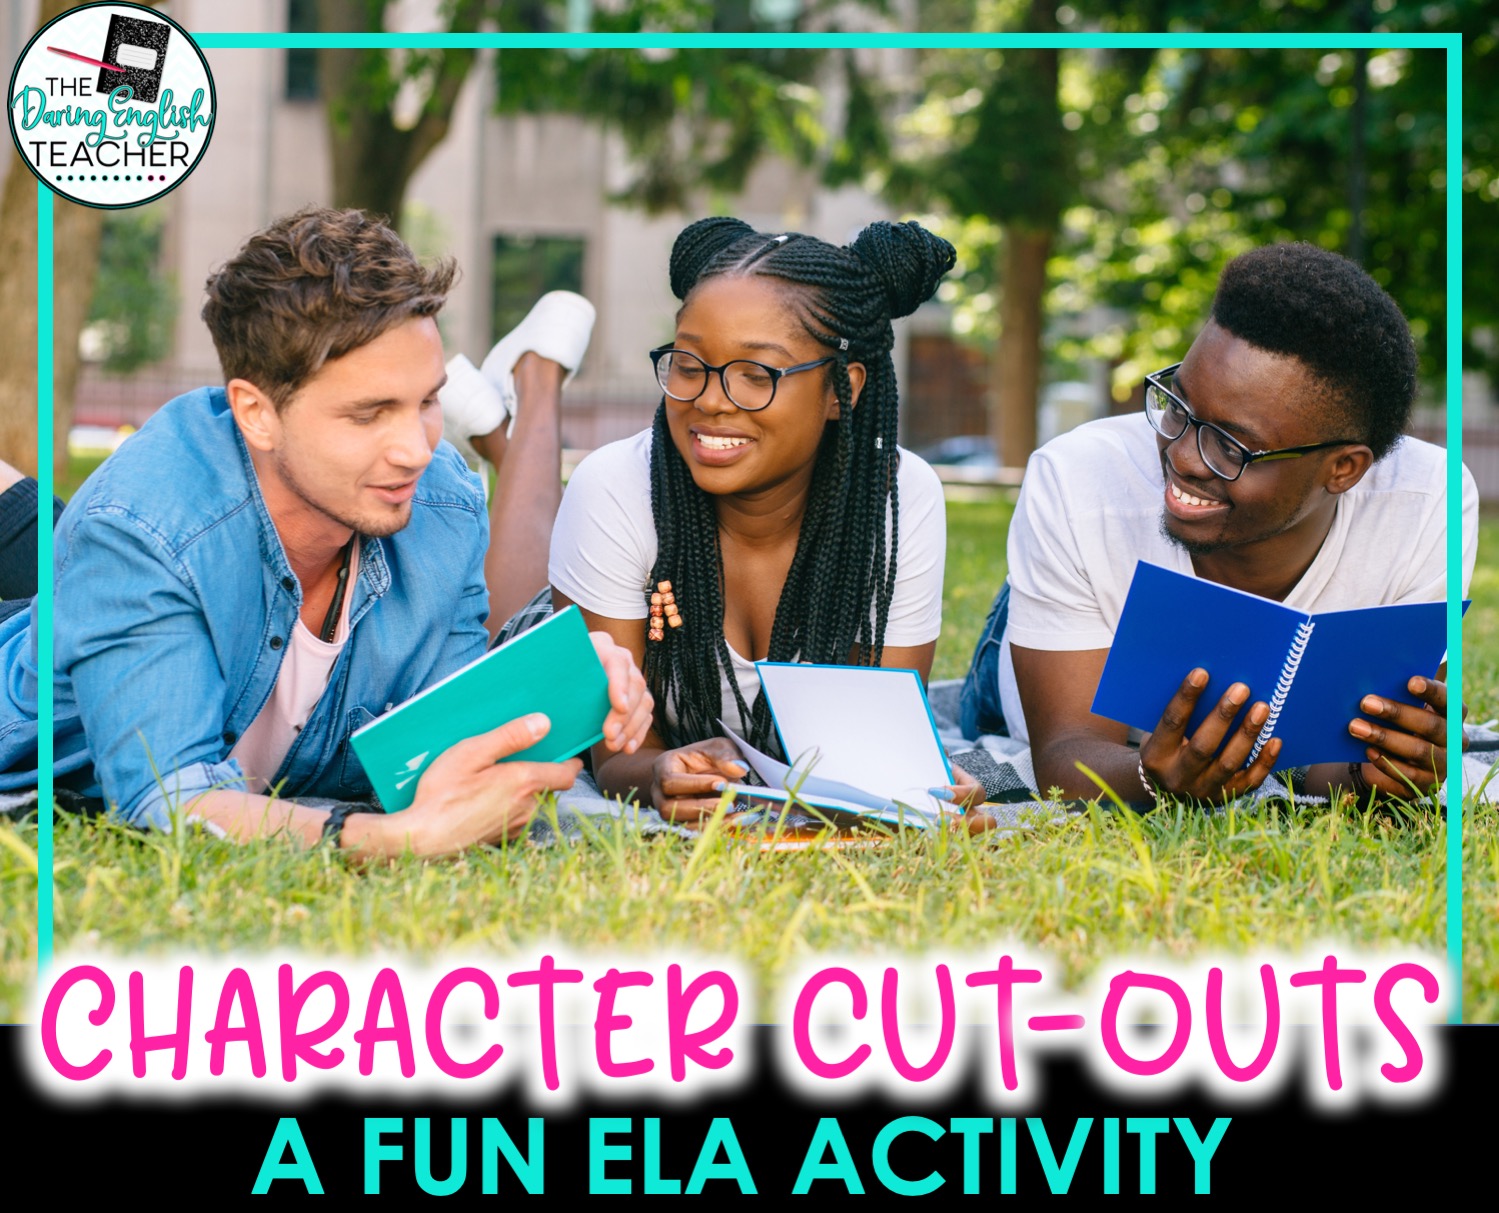 Character Cut-outs: A Creative Way to Explore Characterization